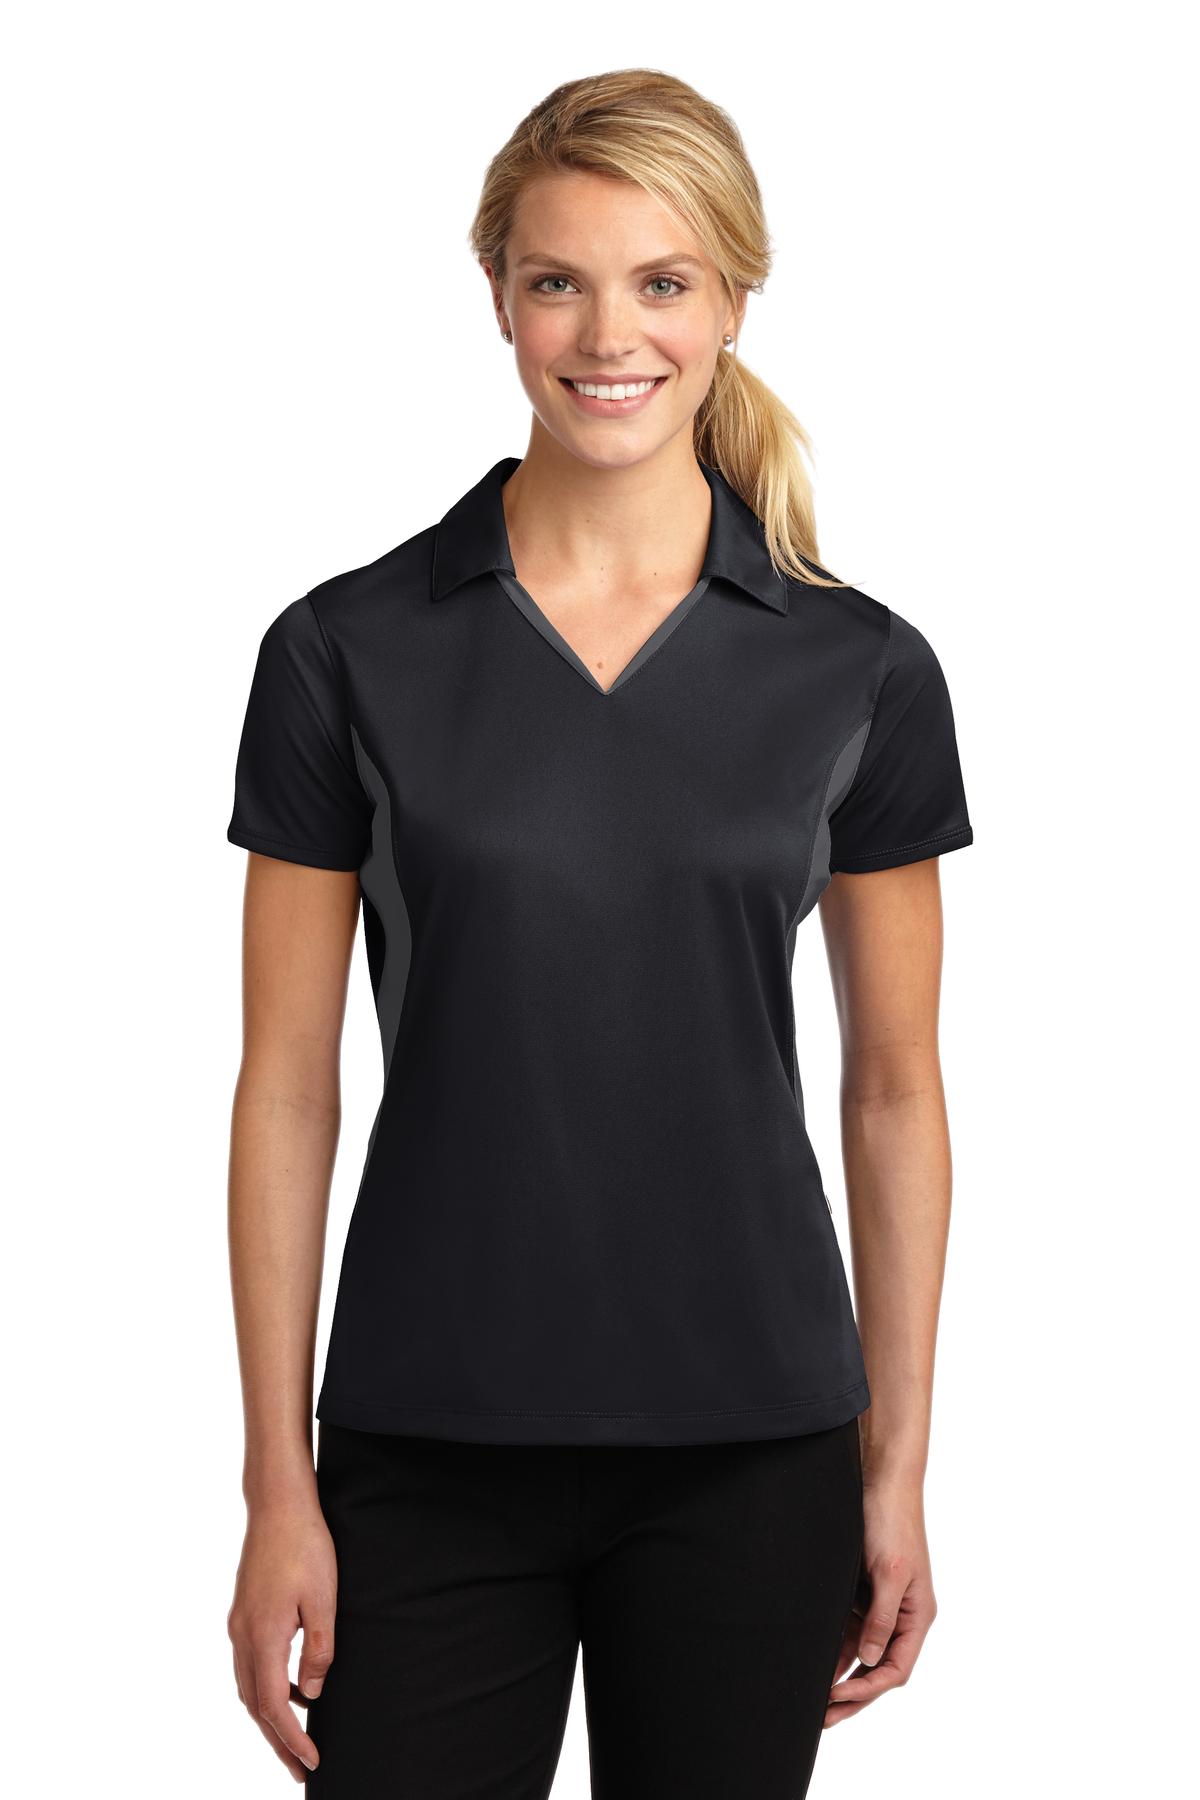 Ladies Side Blocked Micropique Sport-Wick® Polo. LST655